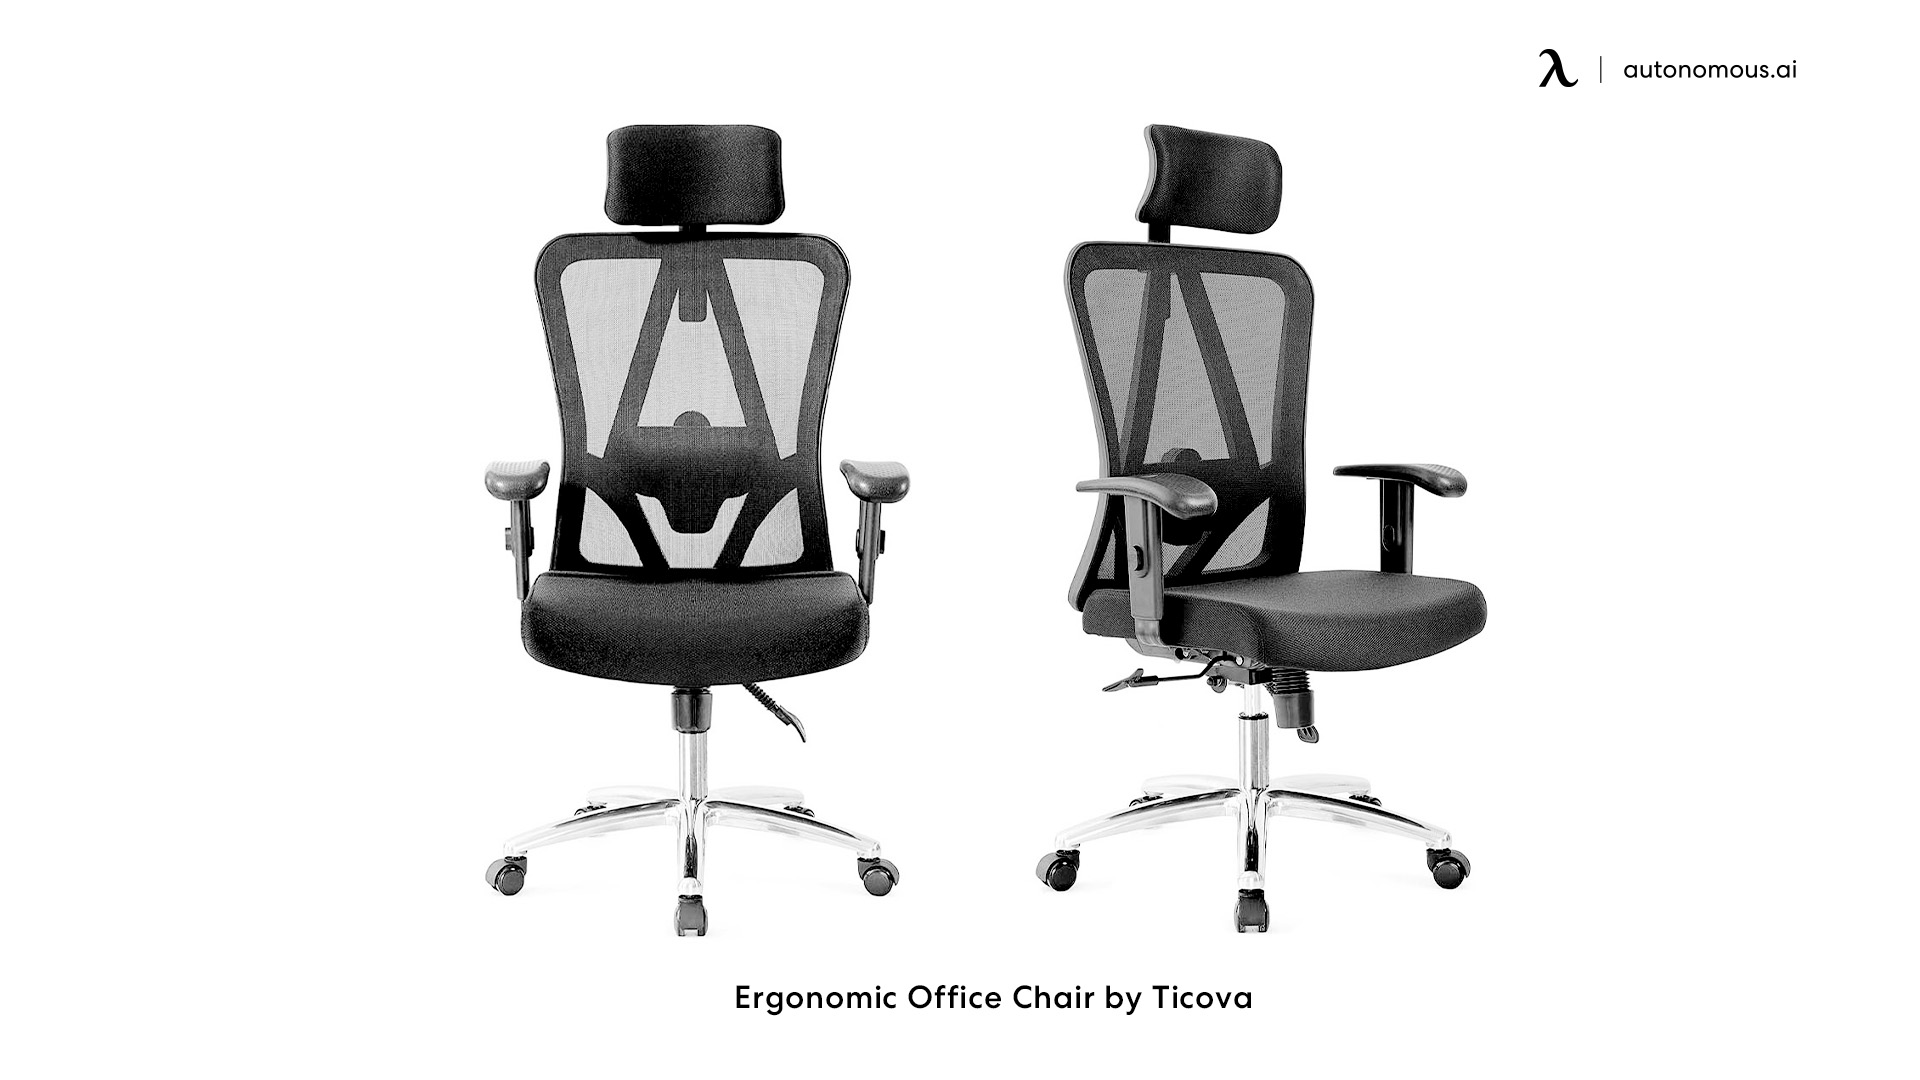 Tivoca Ergonomic home office chair with back support